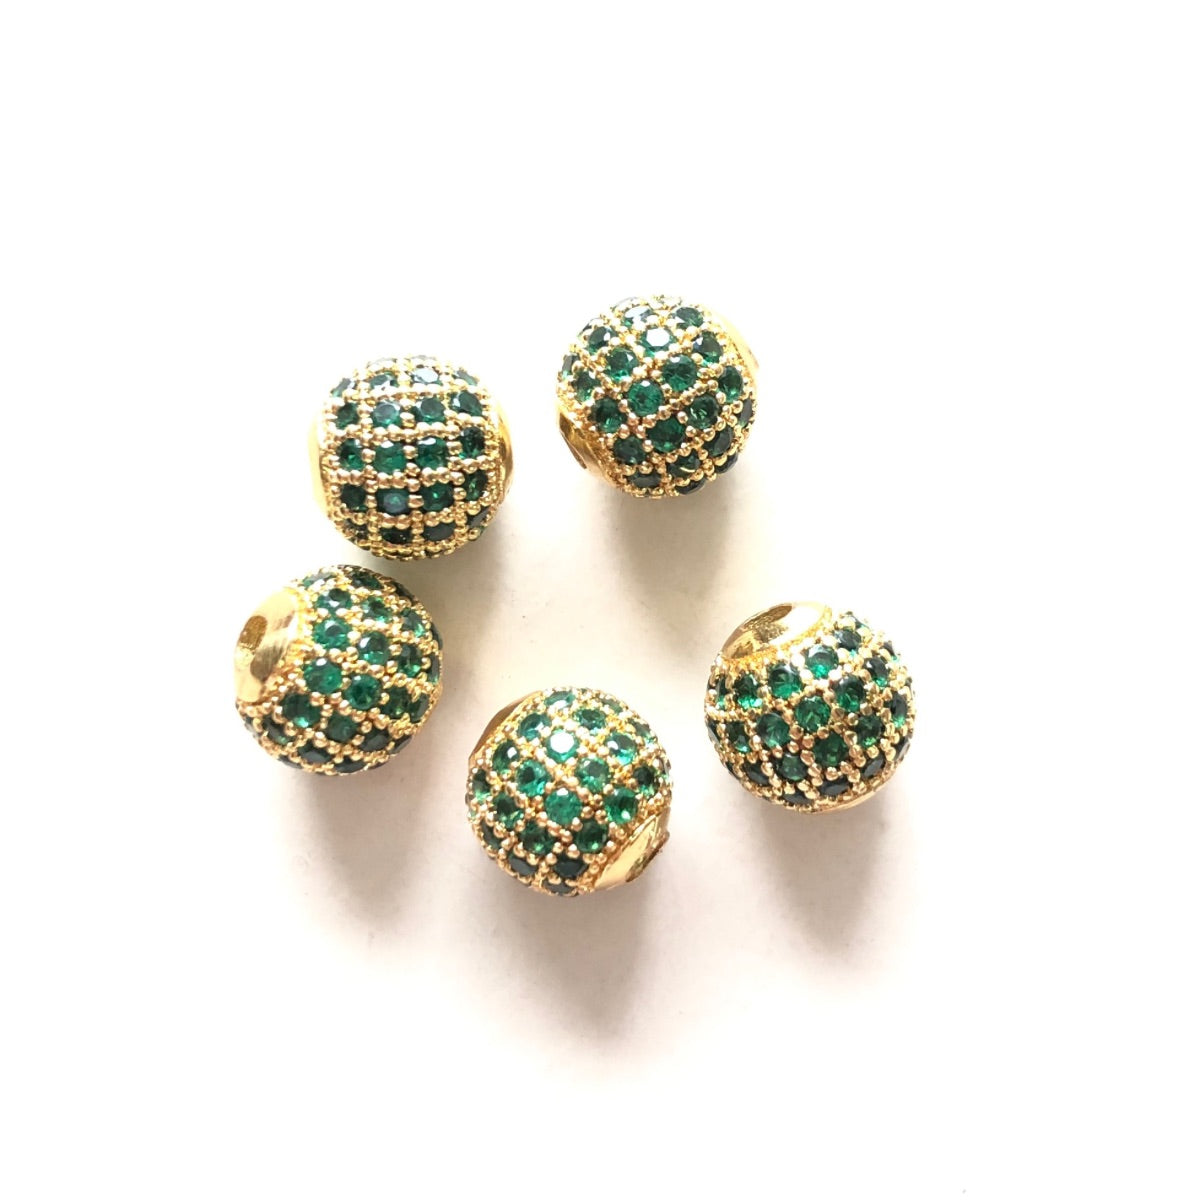 10pcs/lot 6mm, 8mm Colorful CZ Paved Ball Spacers Gold Green CZ Paved Spacers 6mm Beads 8mm Beads Ball Beads Colorful Zirconia New Spacers Arrivals Charms Beads Beyond